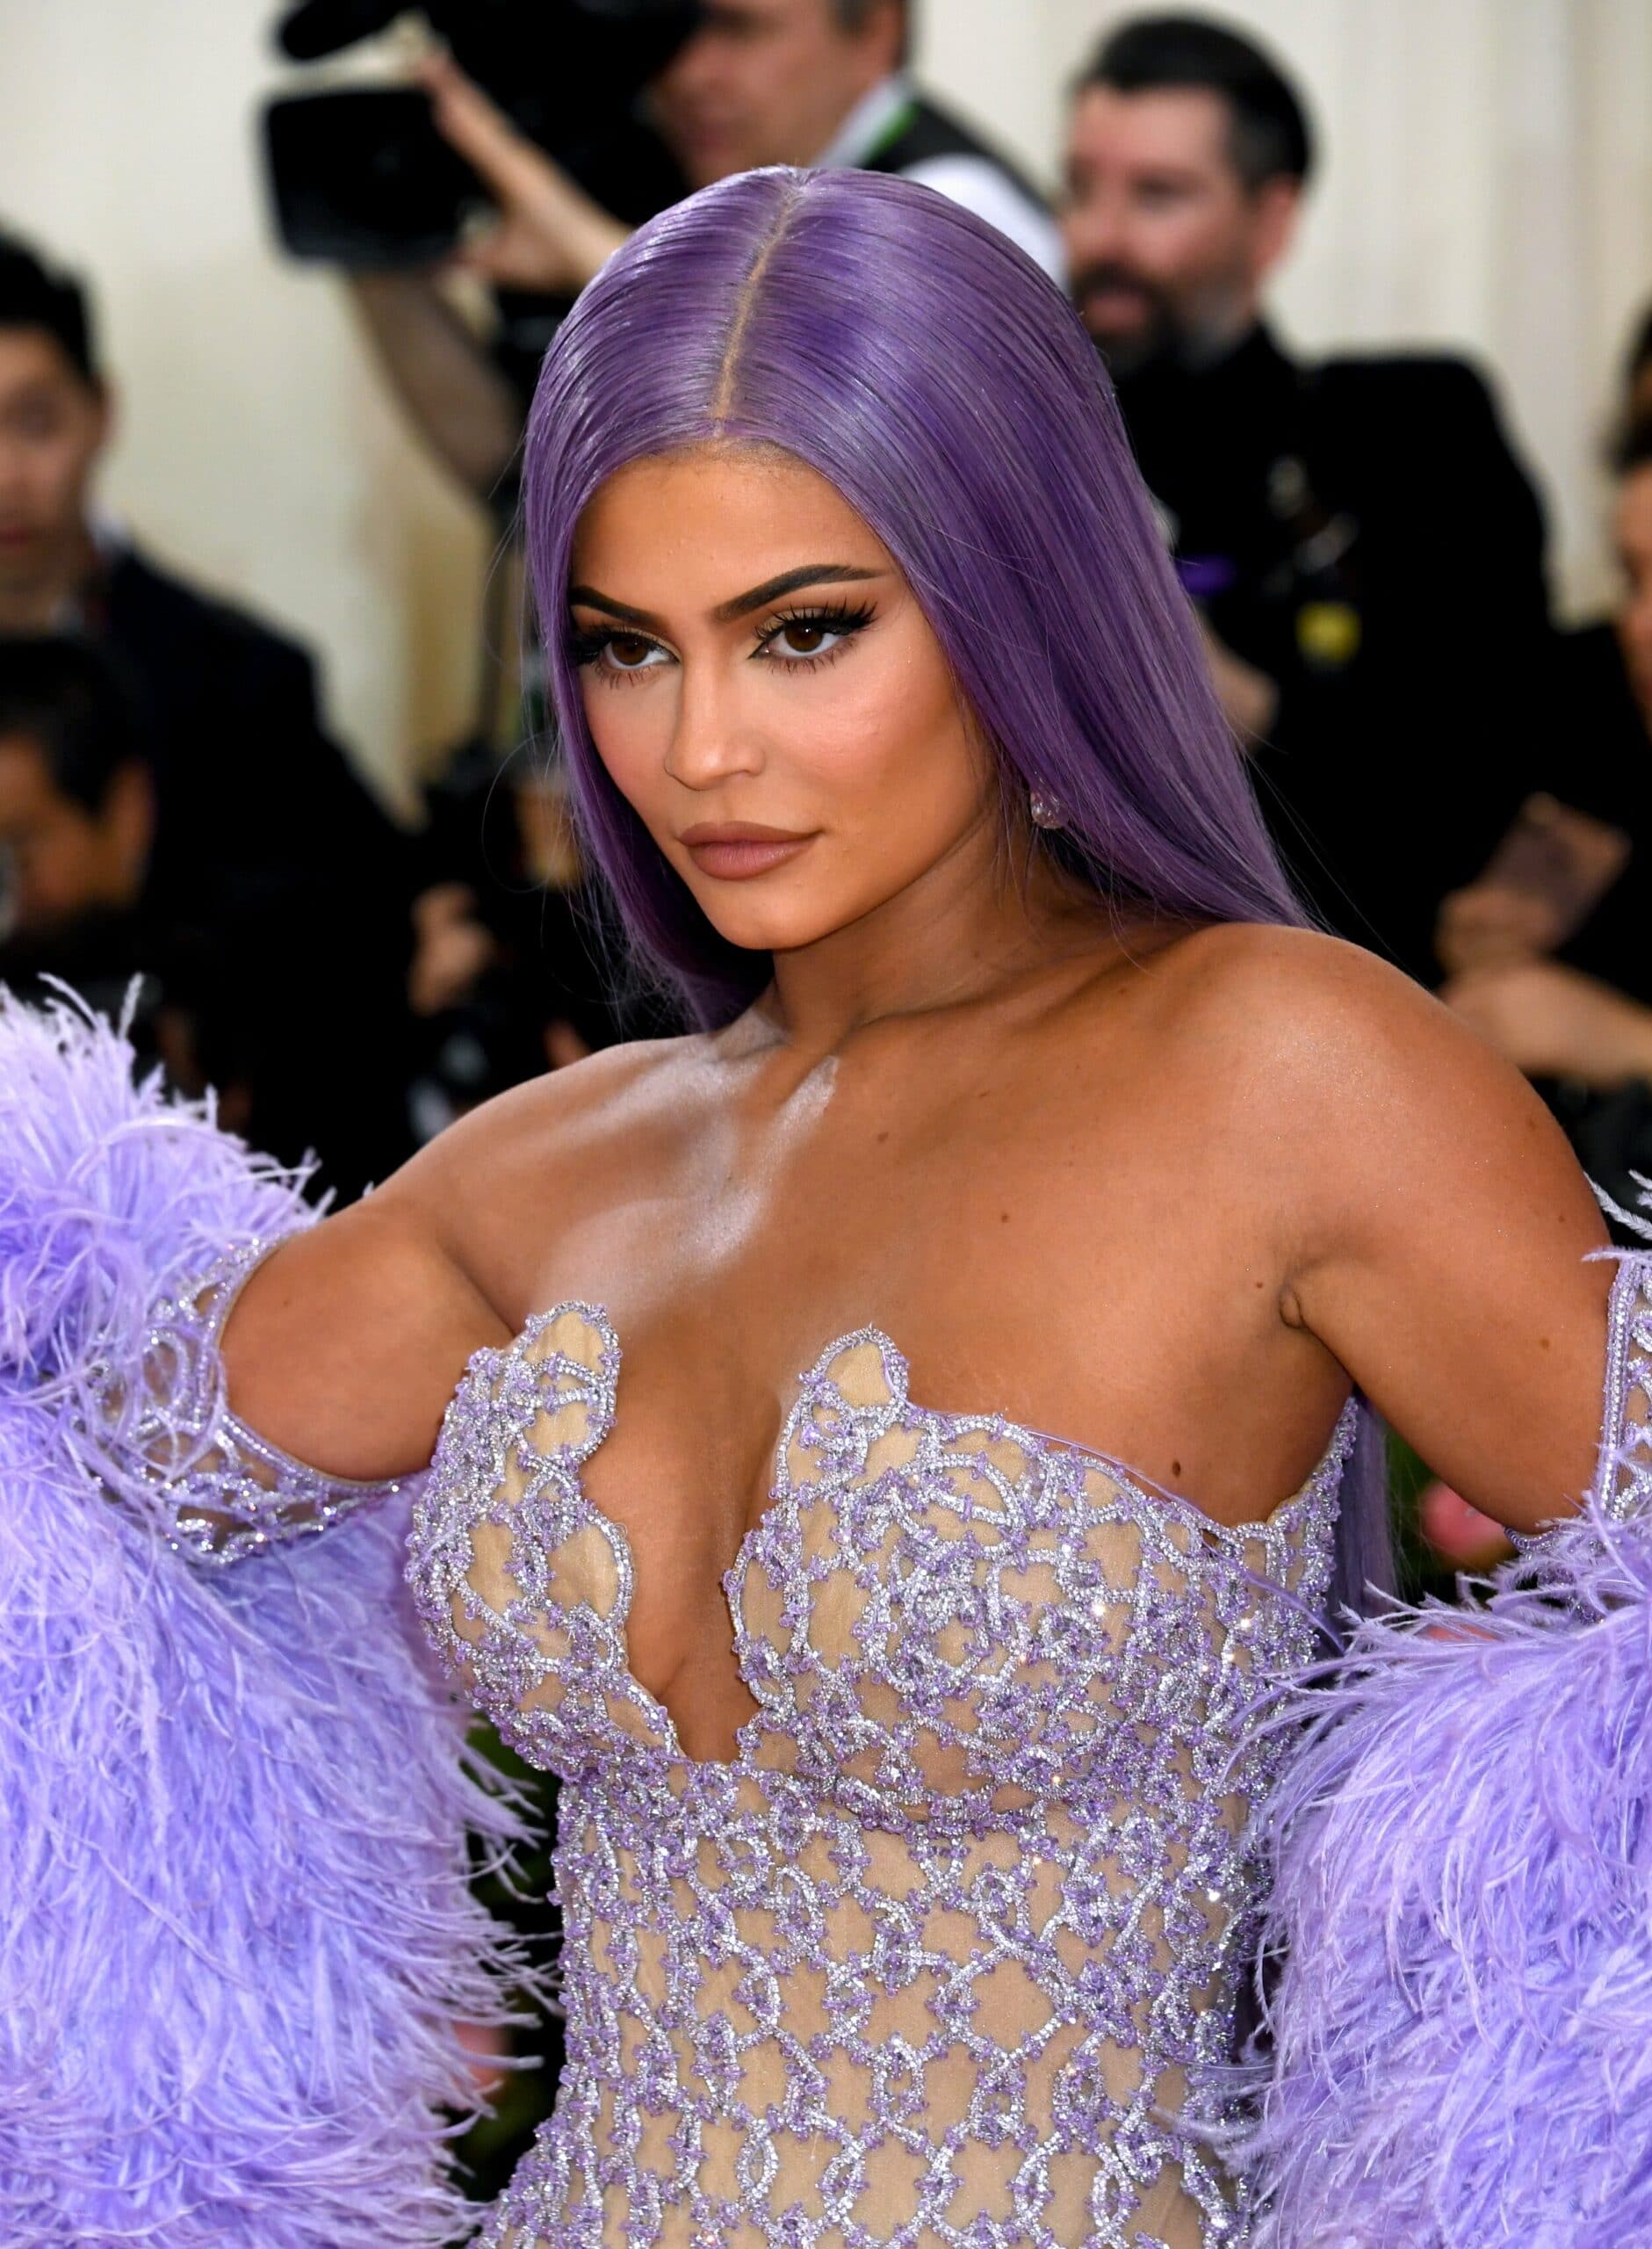 Kylie Jenner Drinks It Every Day, But What Is It and What Does It Do?